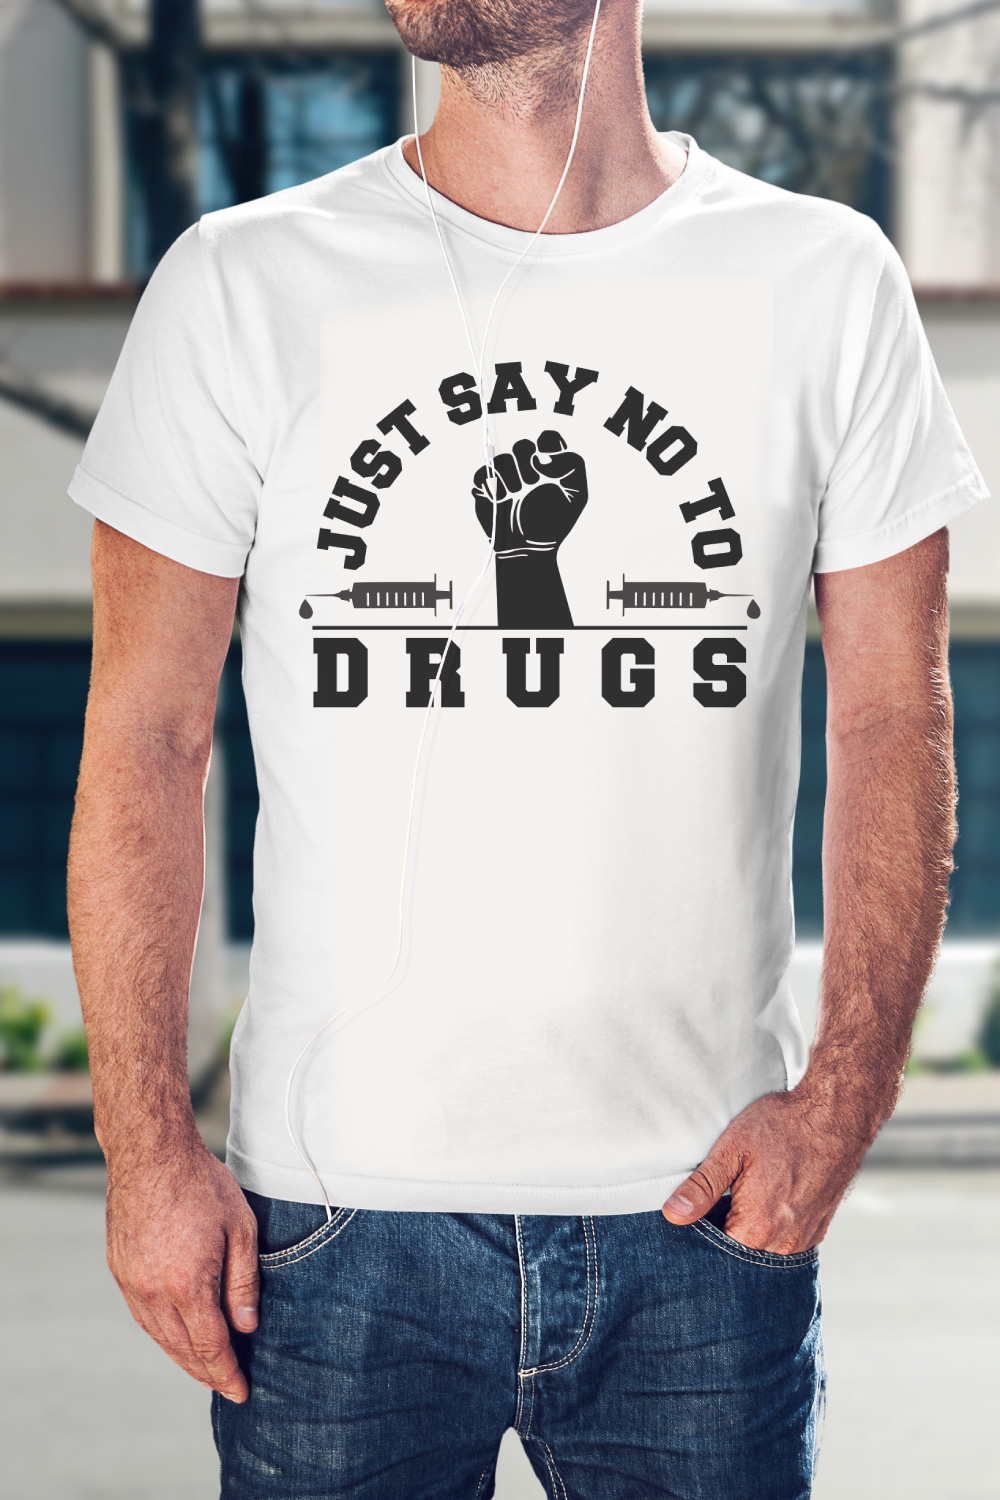 Just say no to drugs tshirt design pinterest preview image.